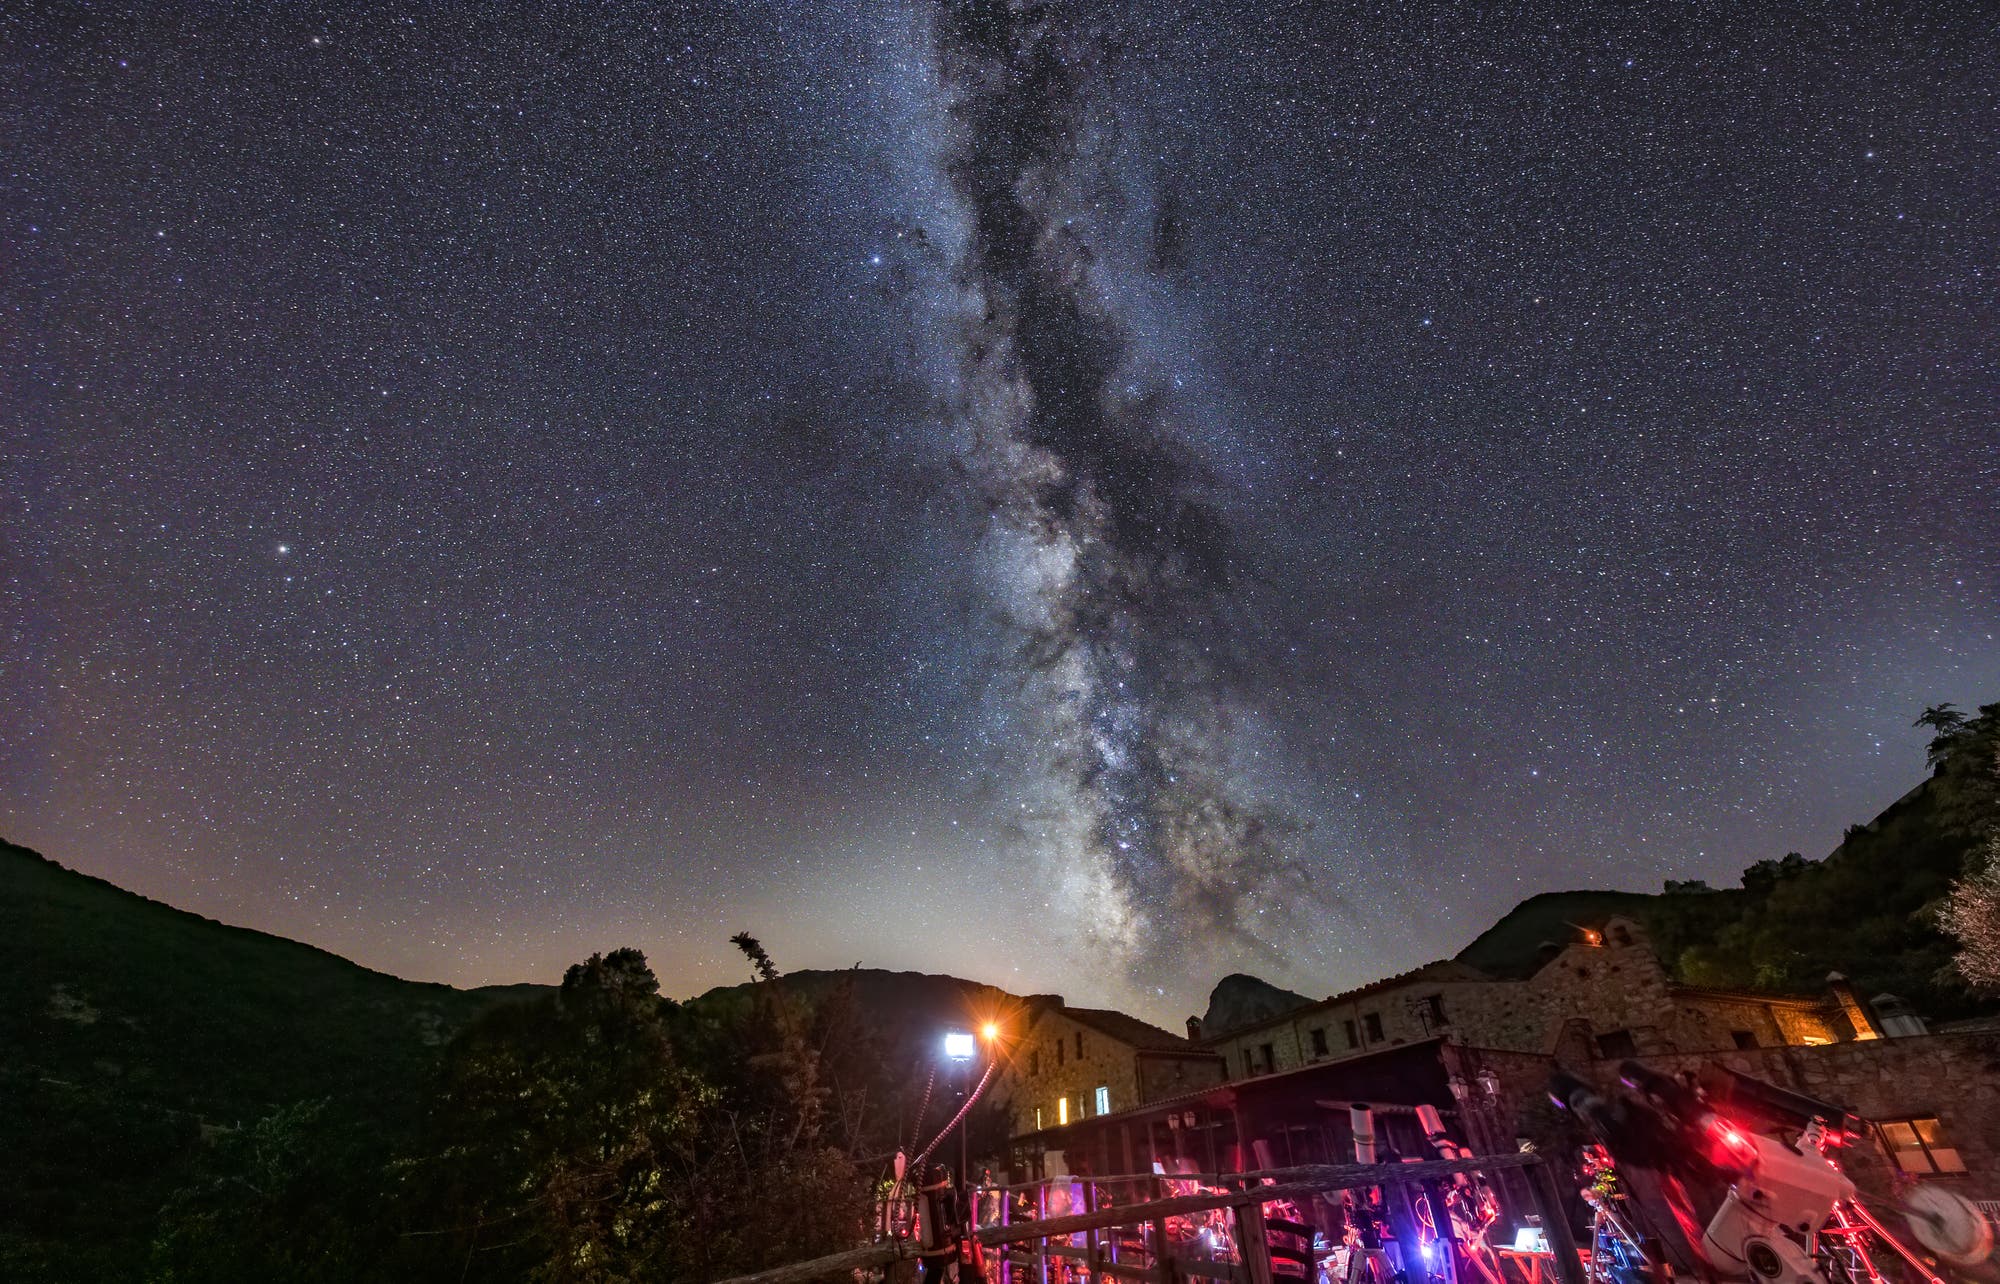 The Milky Way over the star party